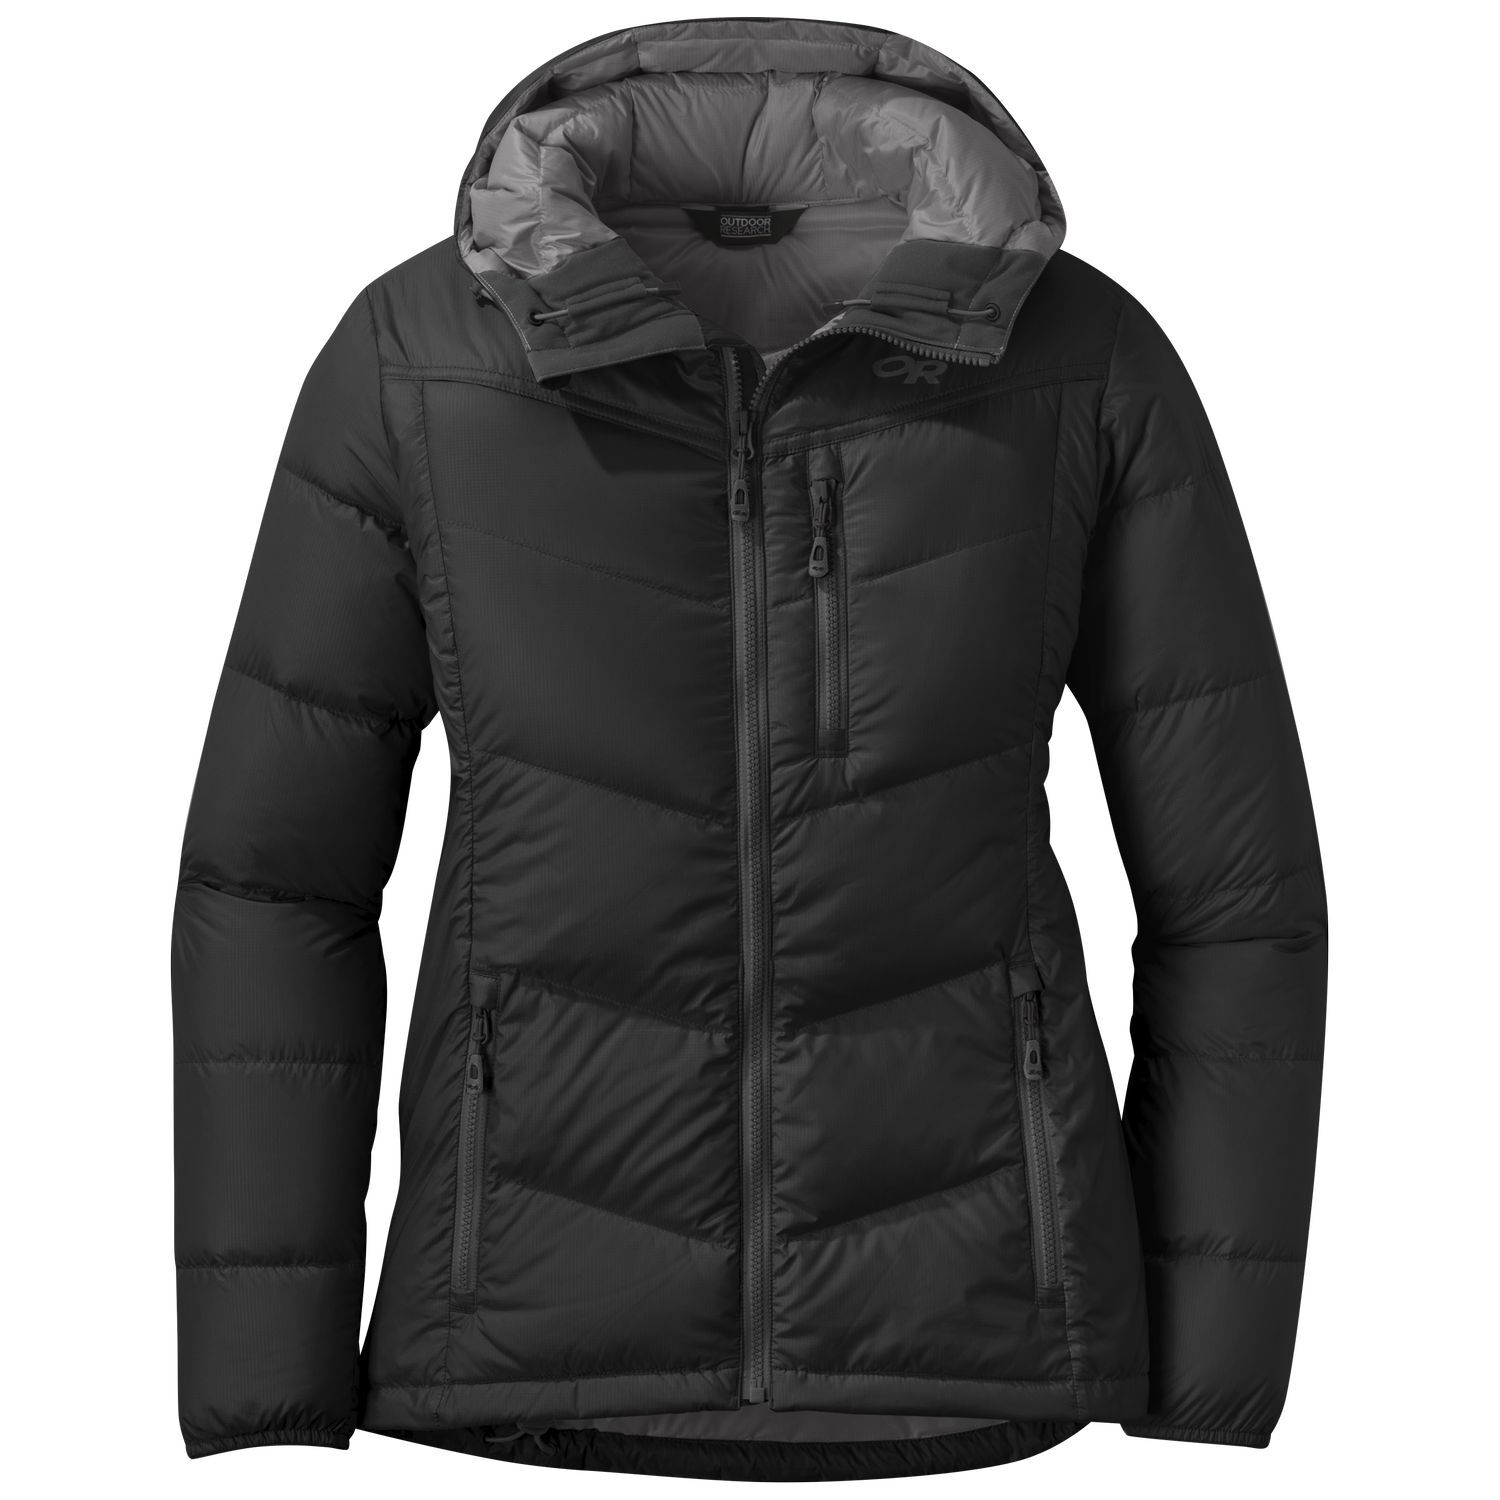 Outdoor Research Transcendent Down Hoody - Down jacket - Women's